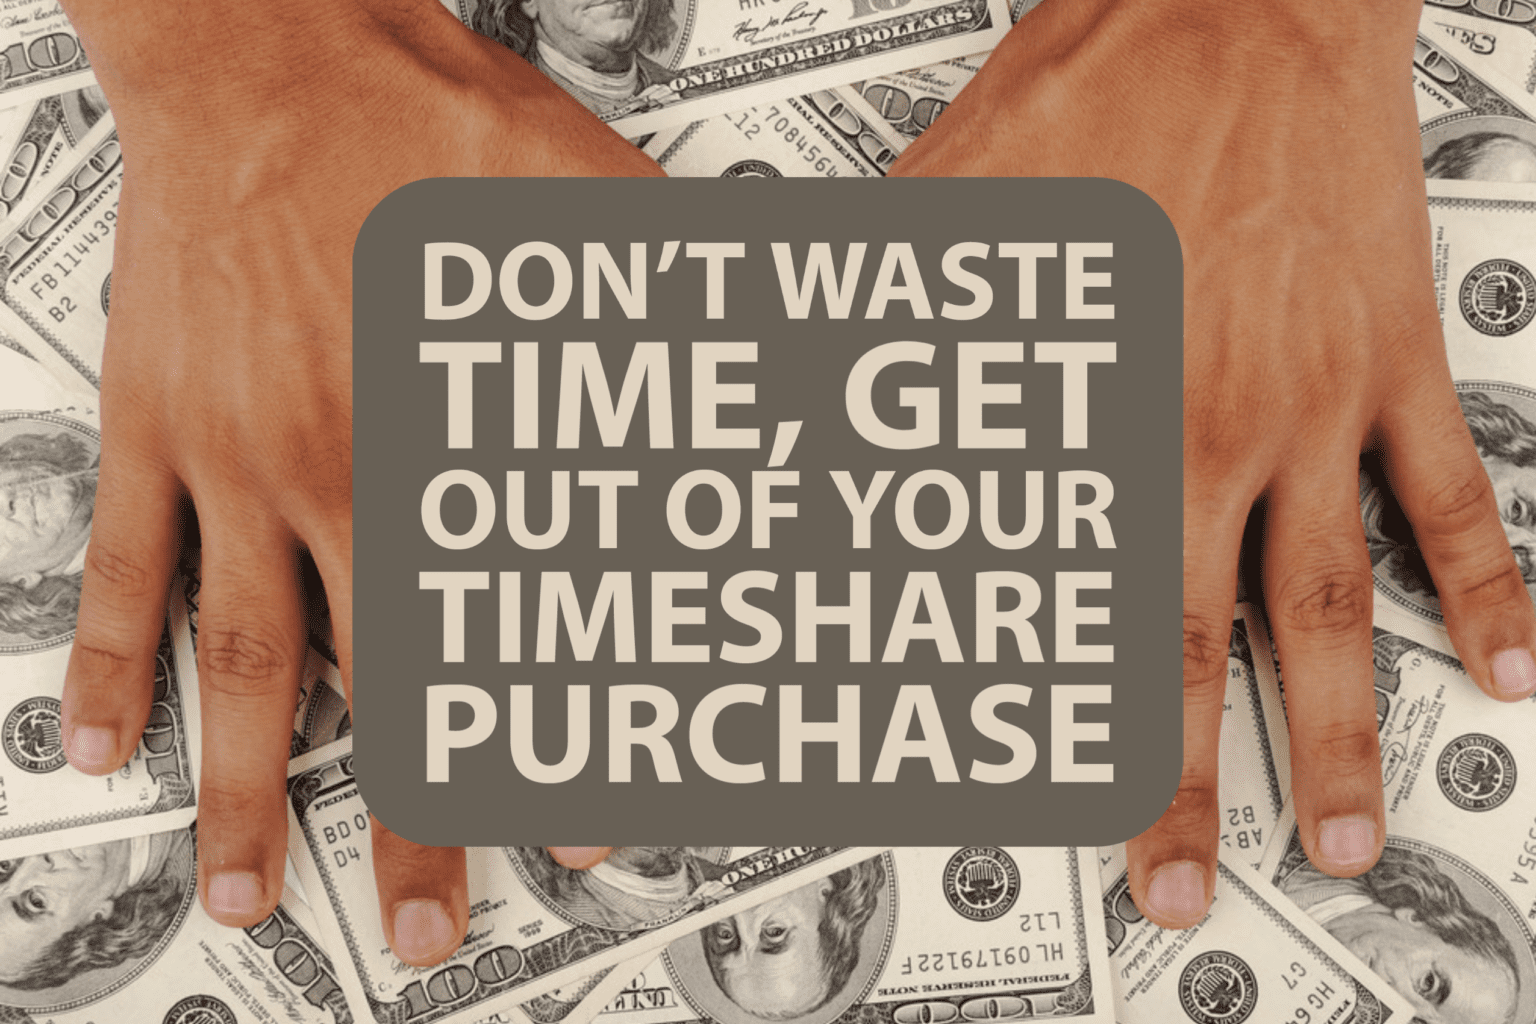 How to purchase a timeshare